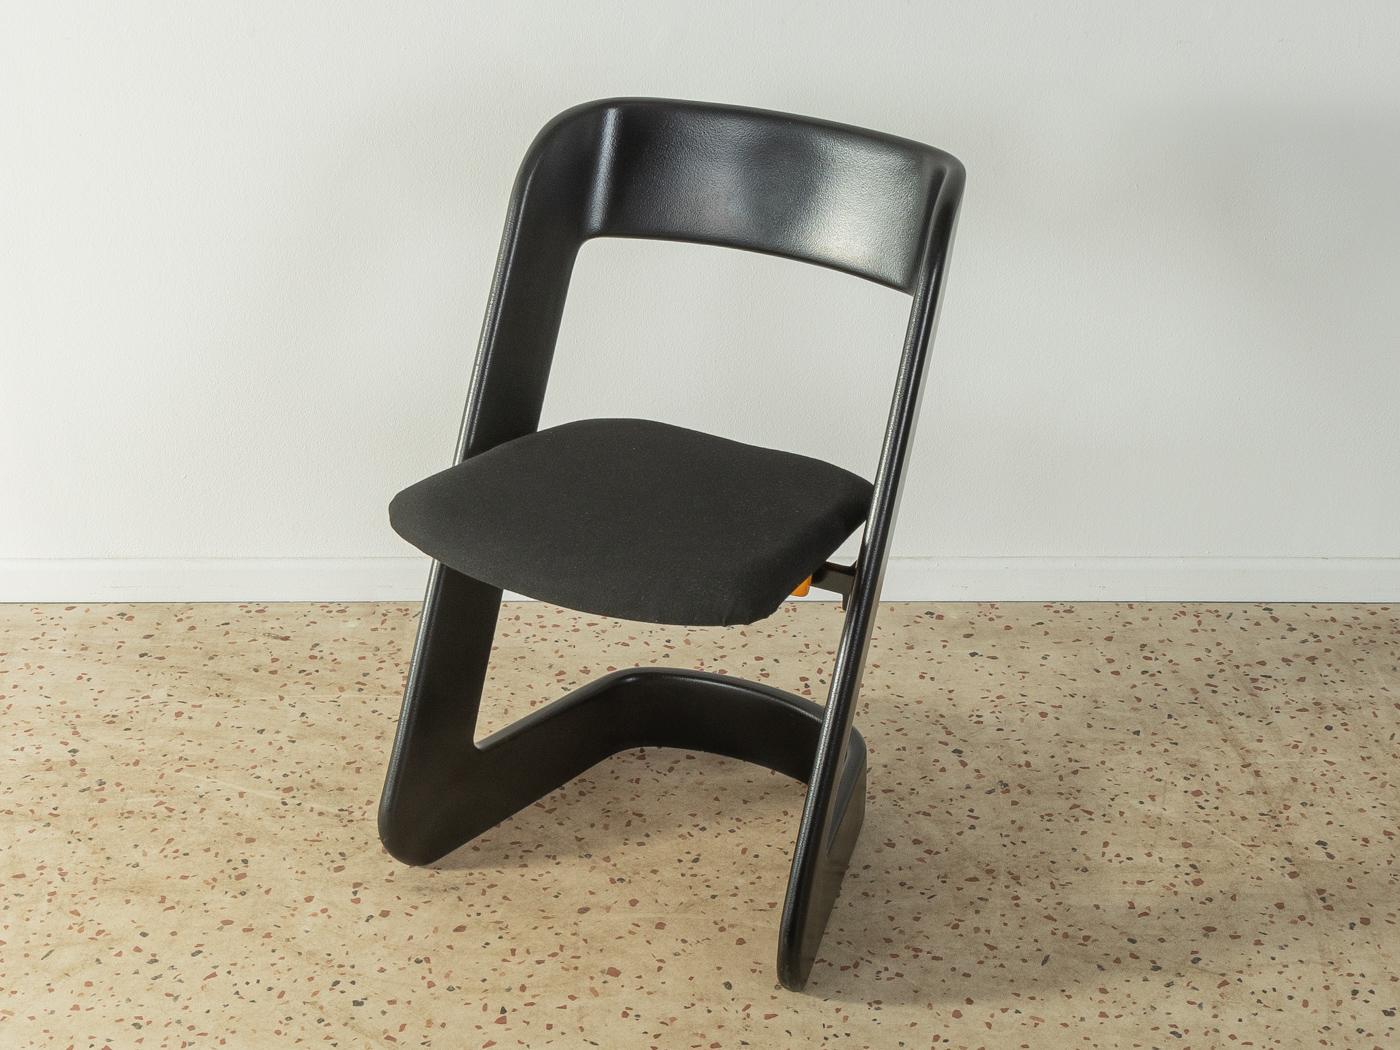 Rare lucy chairs designed by Peter Ghyczy and manufactured by Elastogran GmbH in the 1960s. Curved polyurethane frame with a fold-up plastic seat with a new black upholstery. The offer includes 4 chairs.

Quality Features:
 accomplished design: